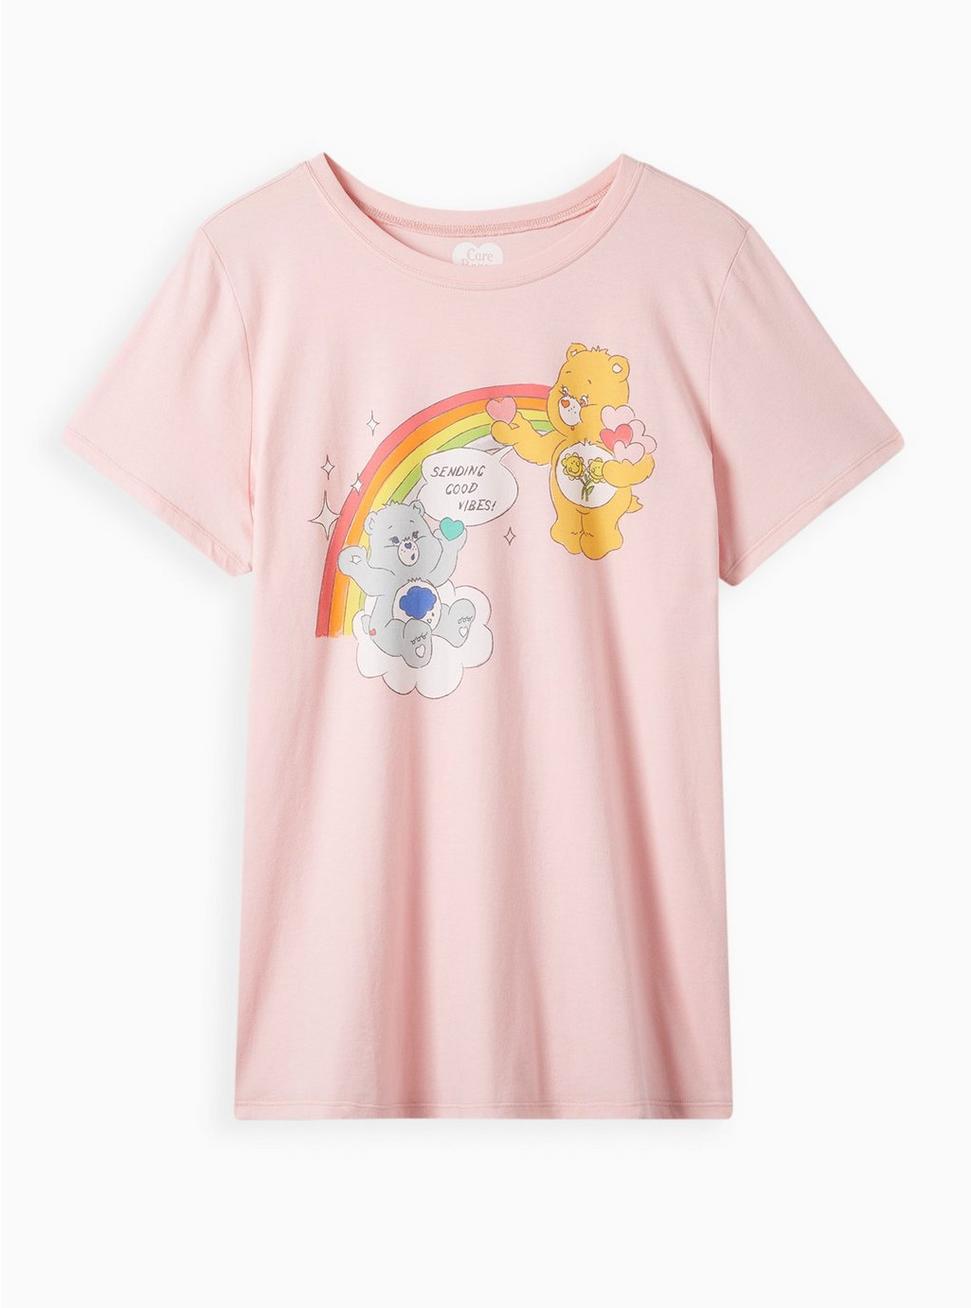 Plus Size Classic Fit Crew Tee - Cotton Care Bears Pink, PINK, hi-res